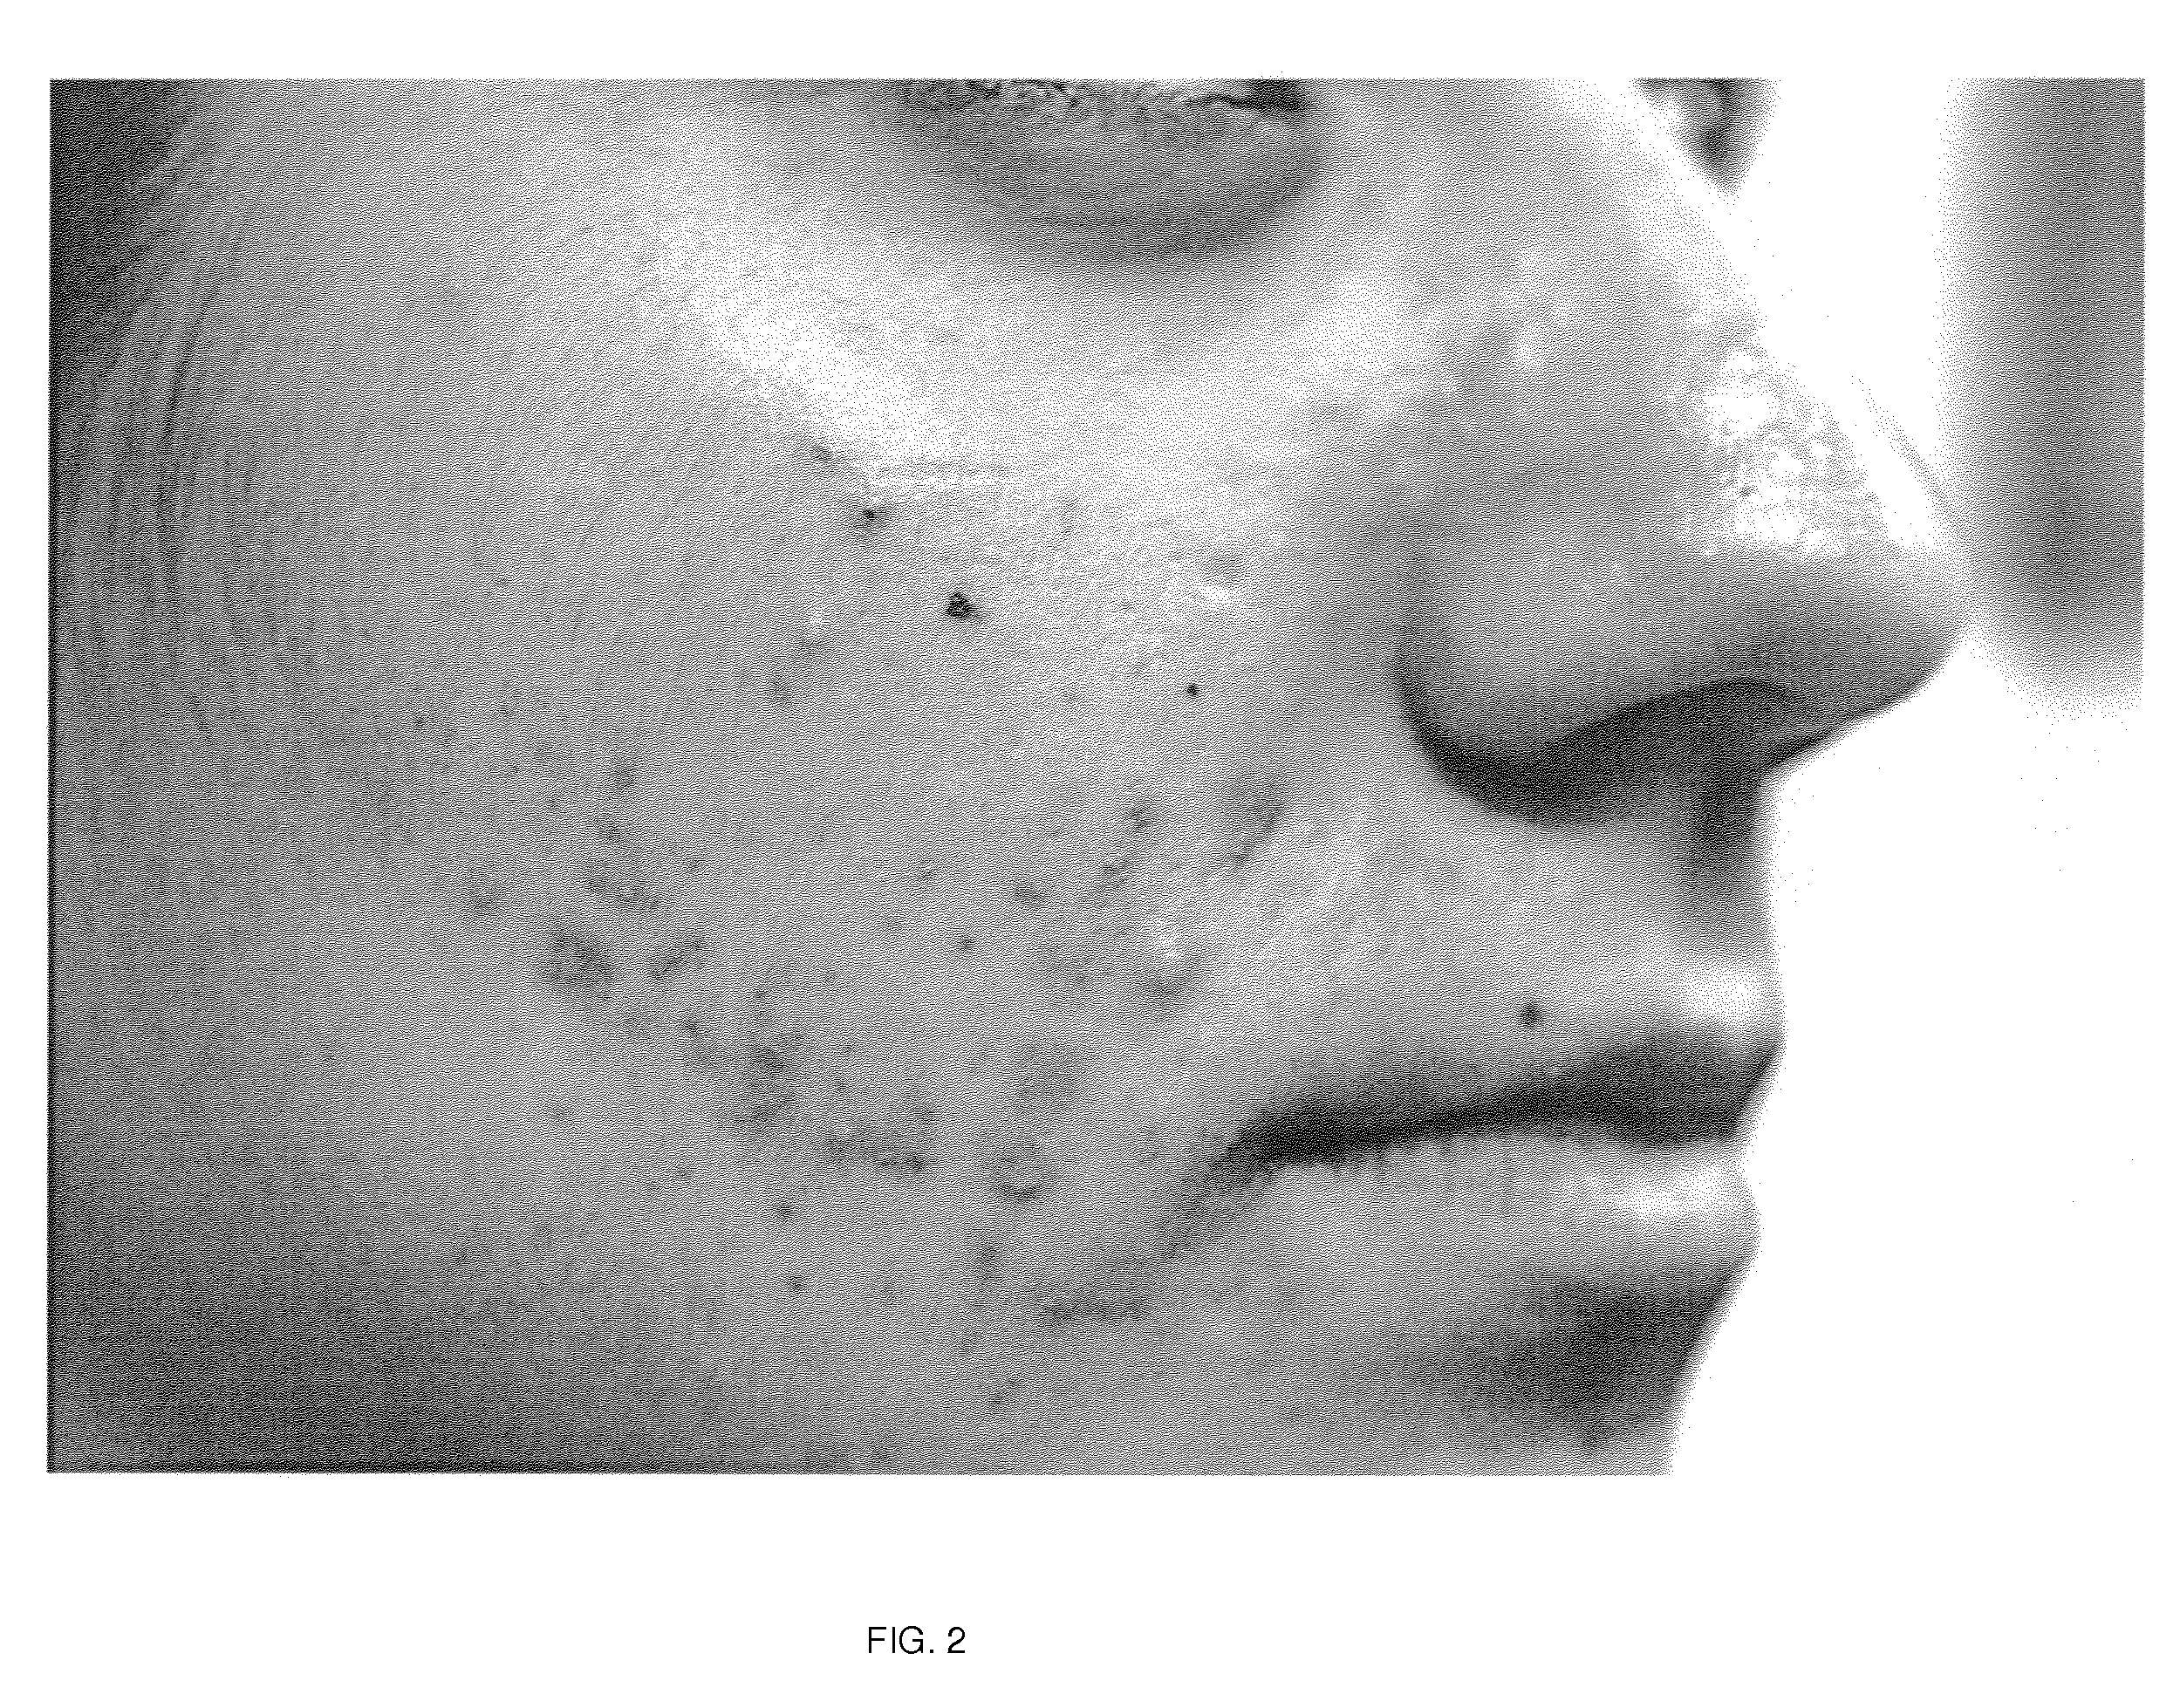 Method to treat and prevent skin diseases with Porifera-based therapeutic compositions treating and preventing skin diseases